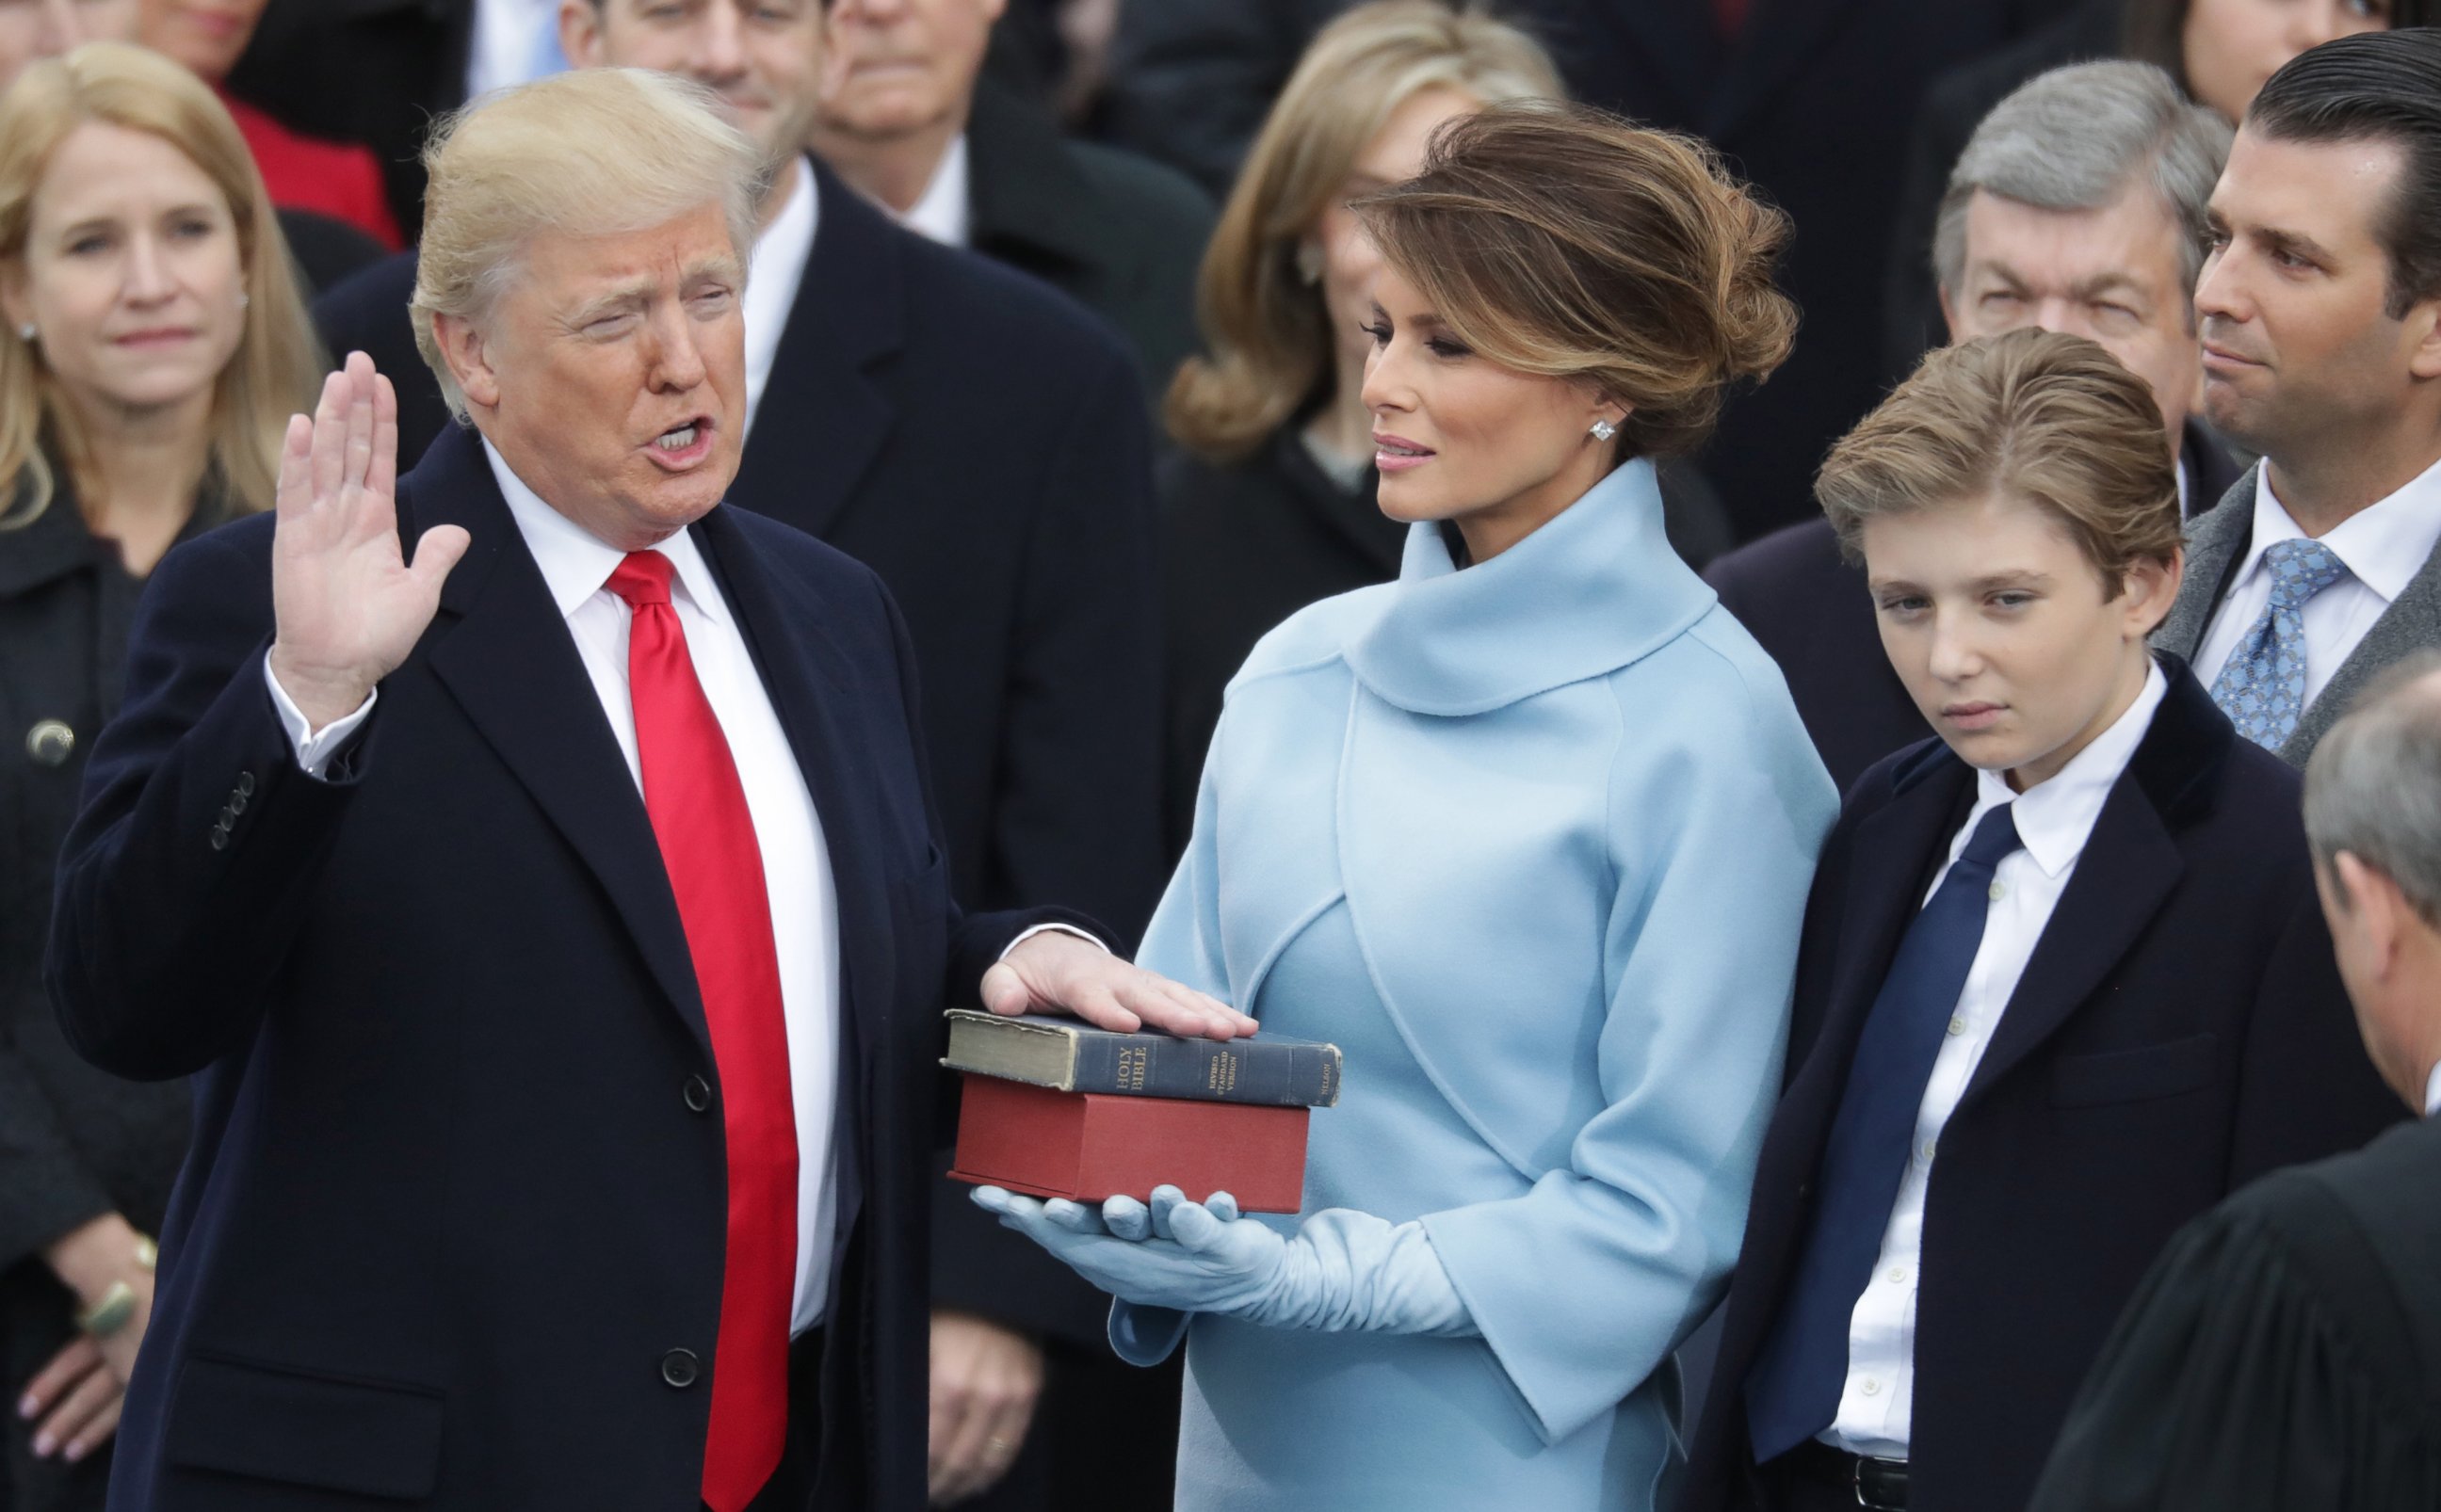 PHOTO: (L-R) President Donald Trump takes the oath of office as his wife Melania Trump holds the bible and his son Barron Trump looks on, on the West Front of the U.S. Capitol, Jan. 20, 2017 in Washington, D.C. 